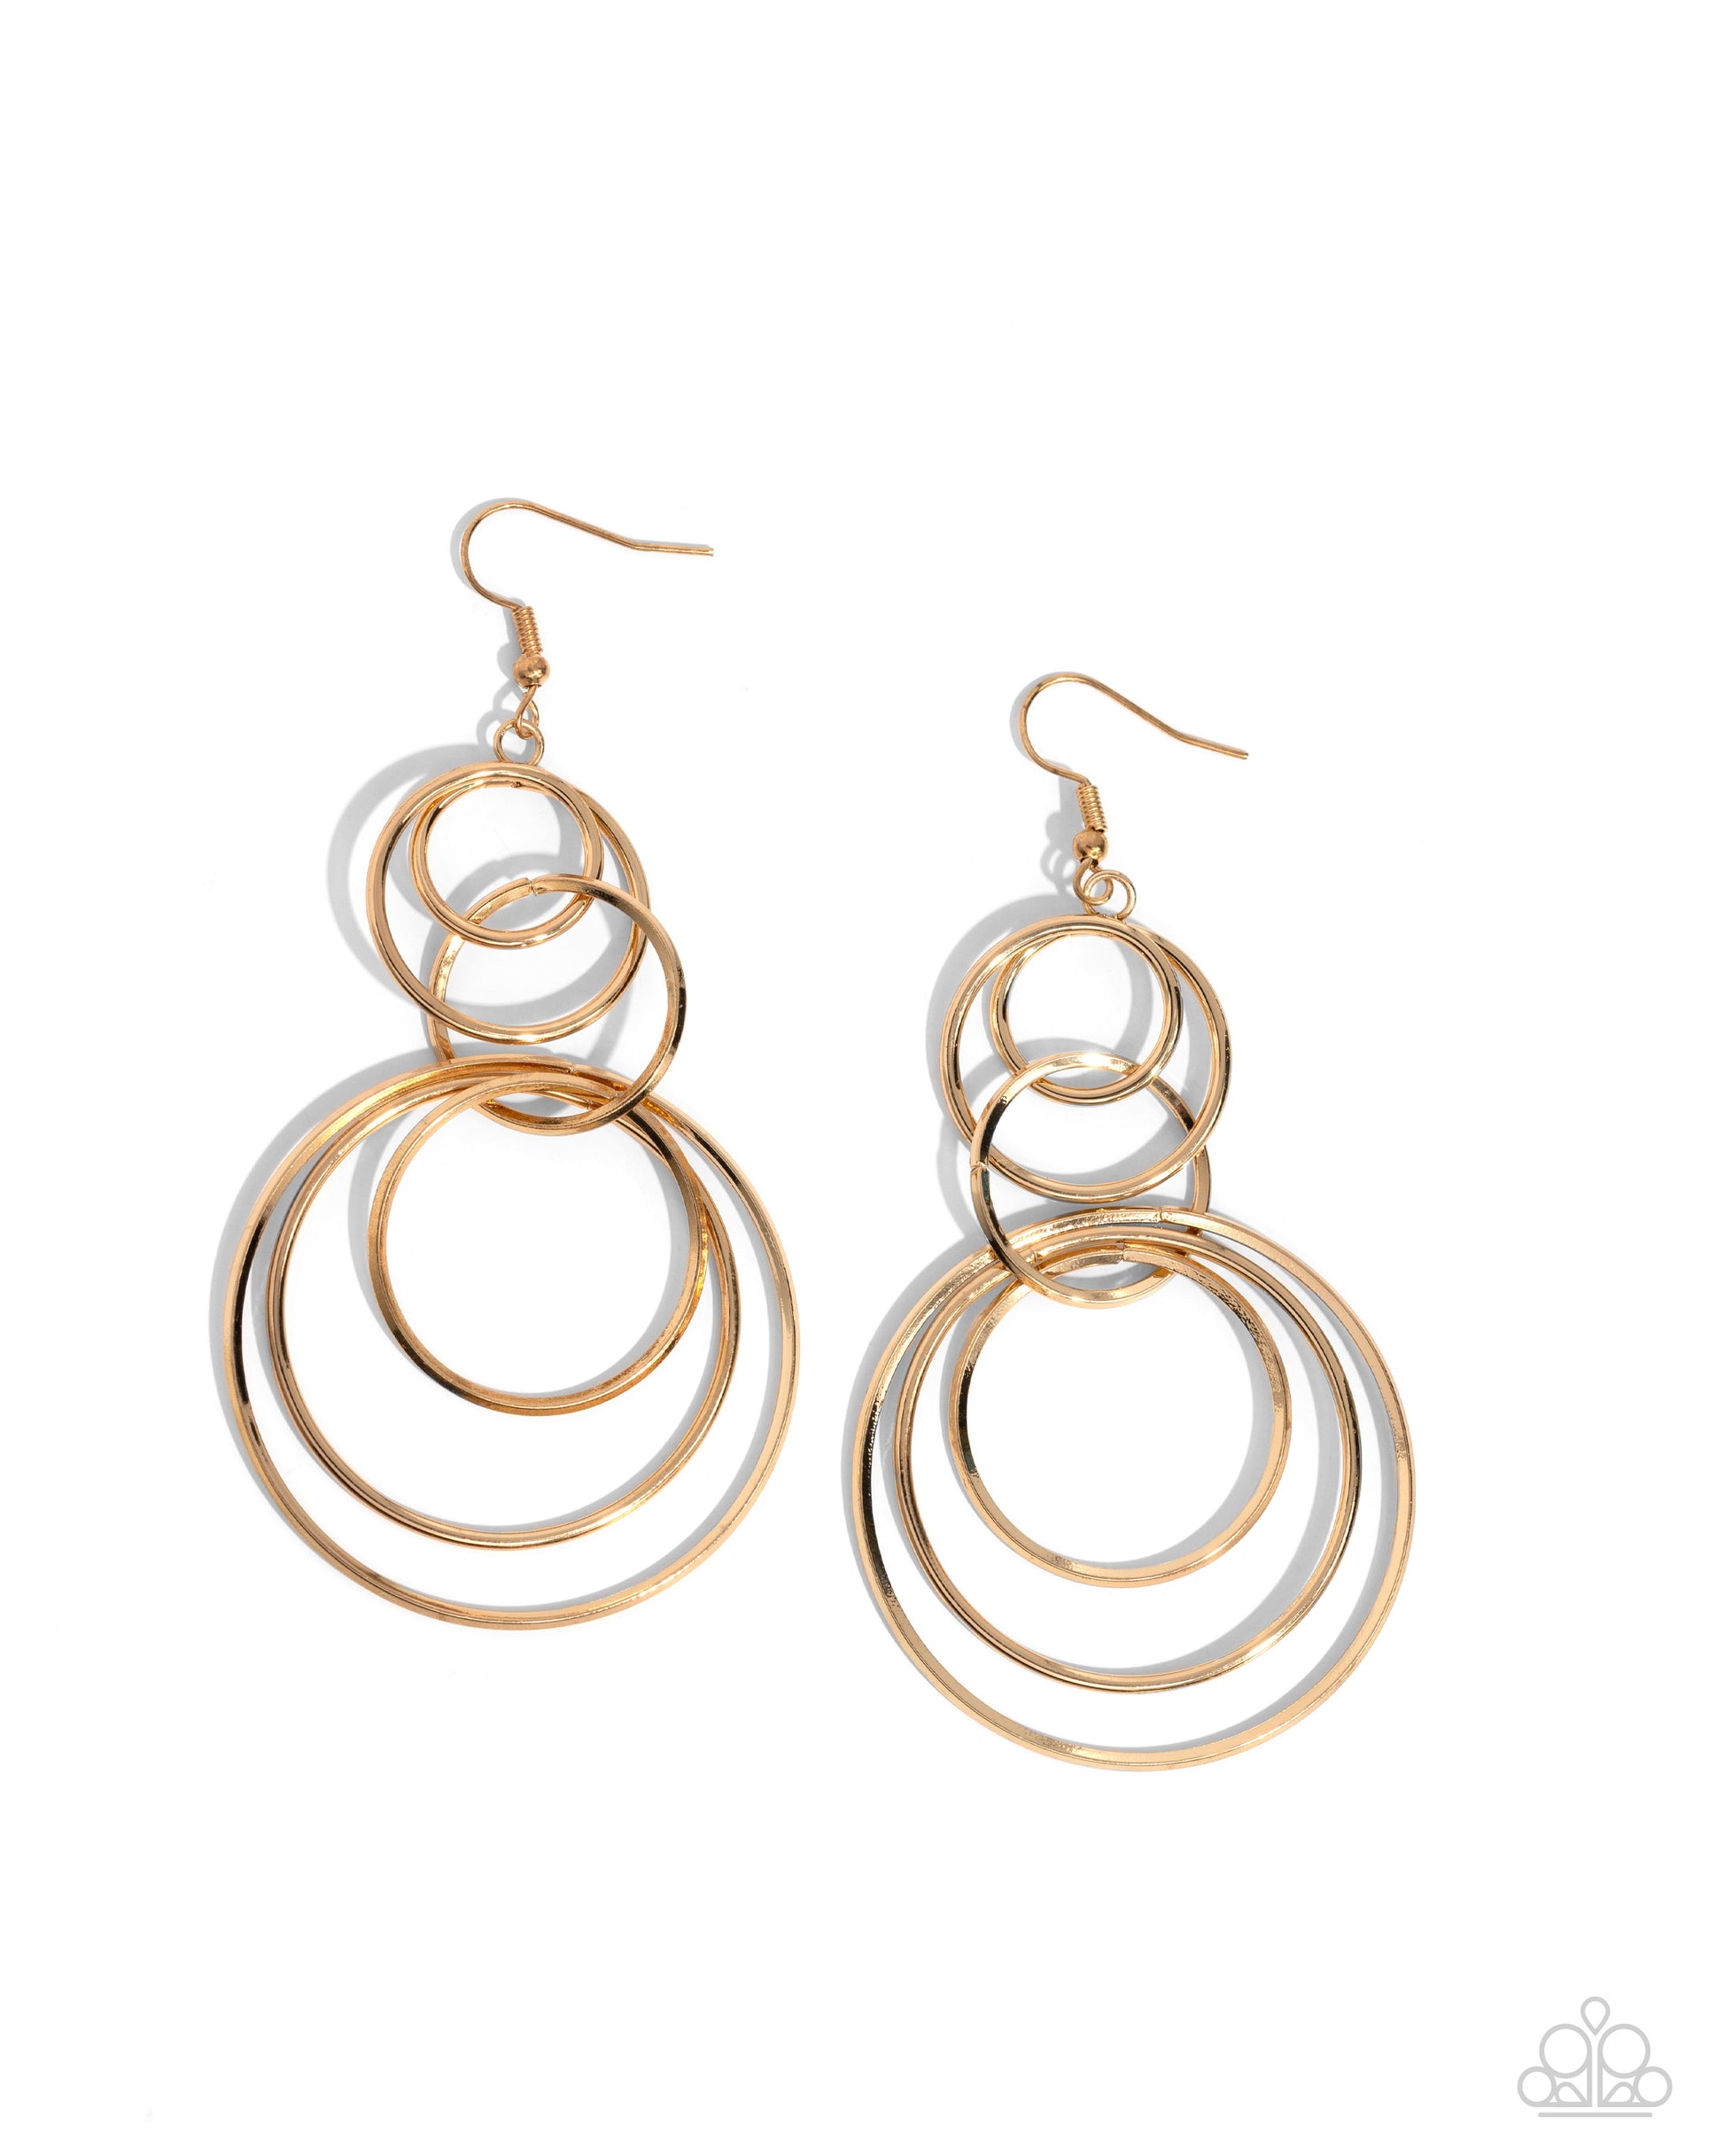 Disorienting Demure - gold - Paparazzi earrings